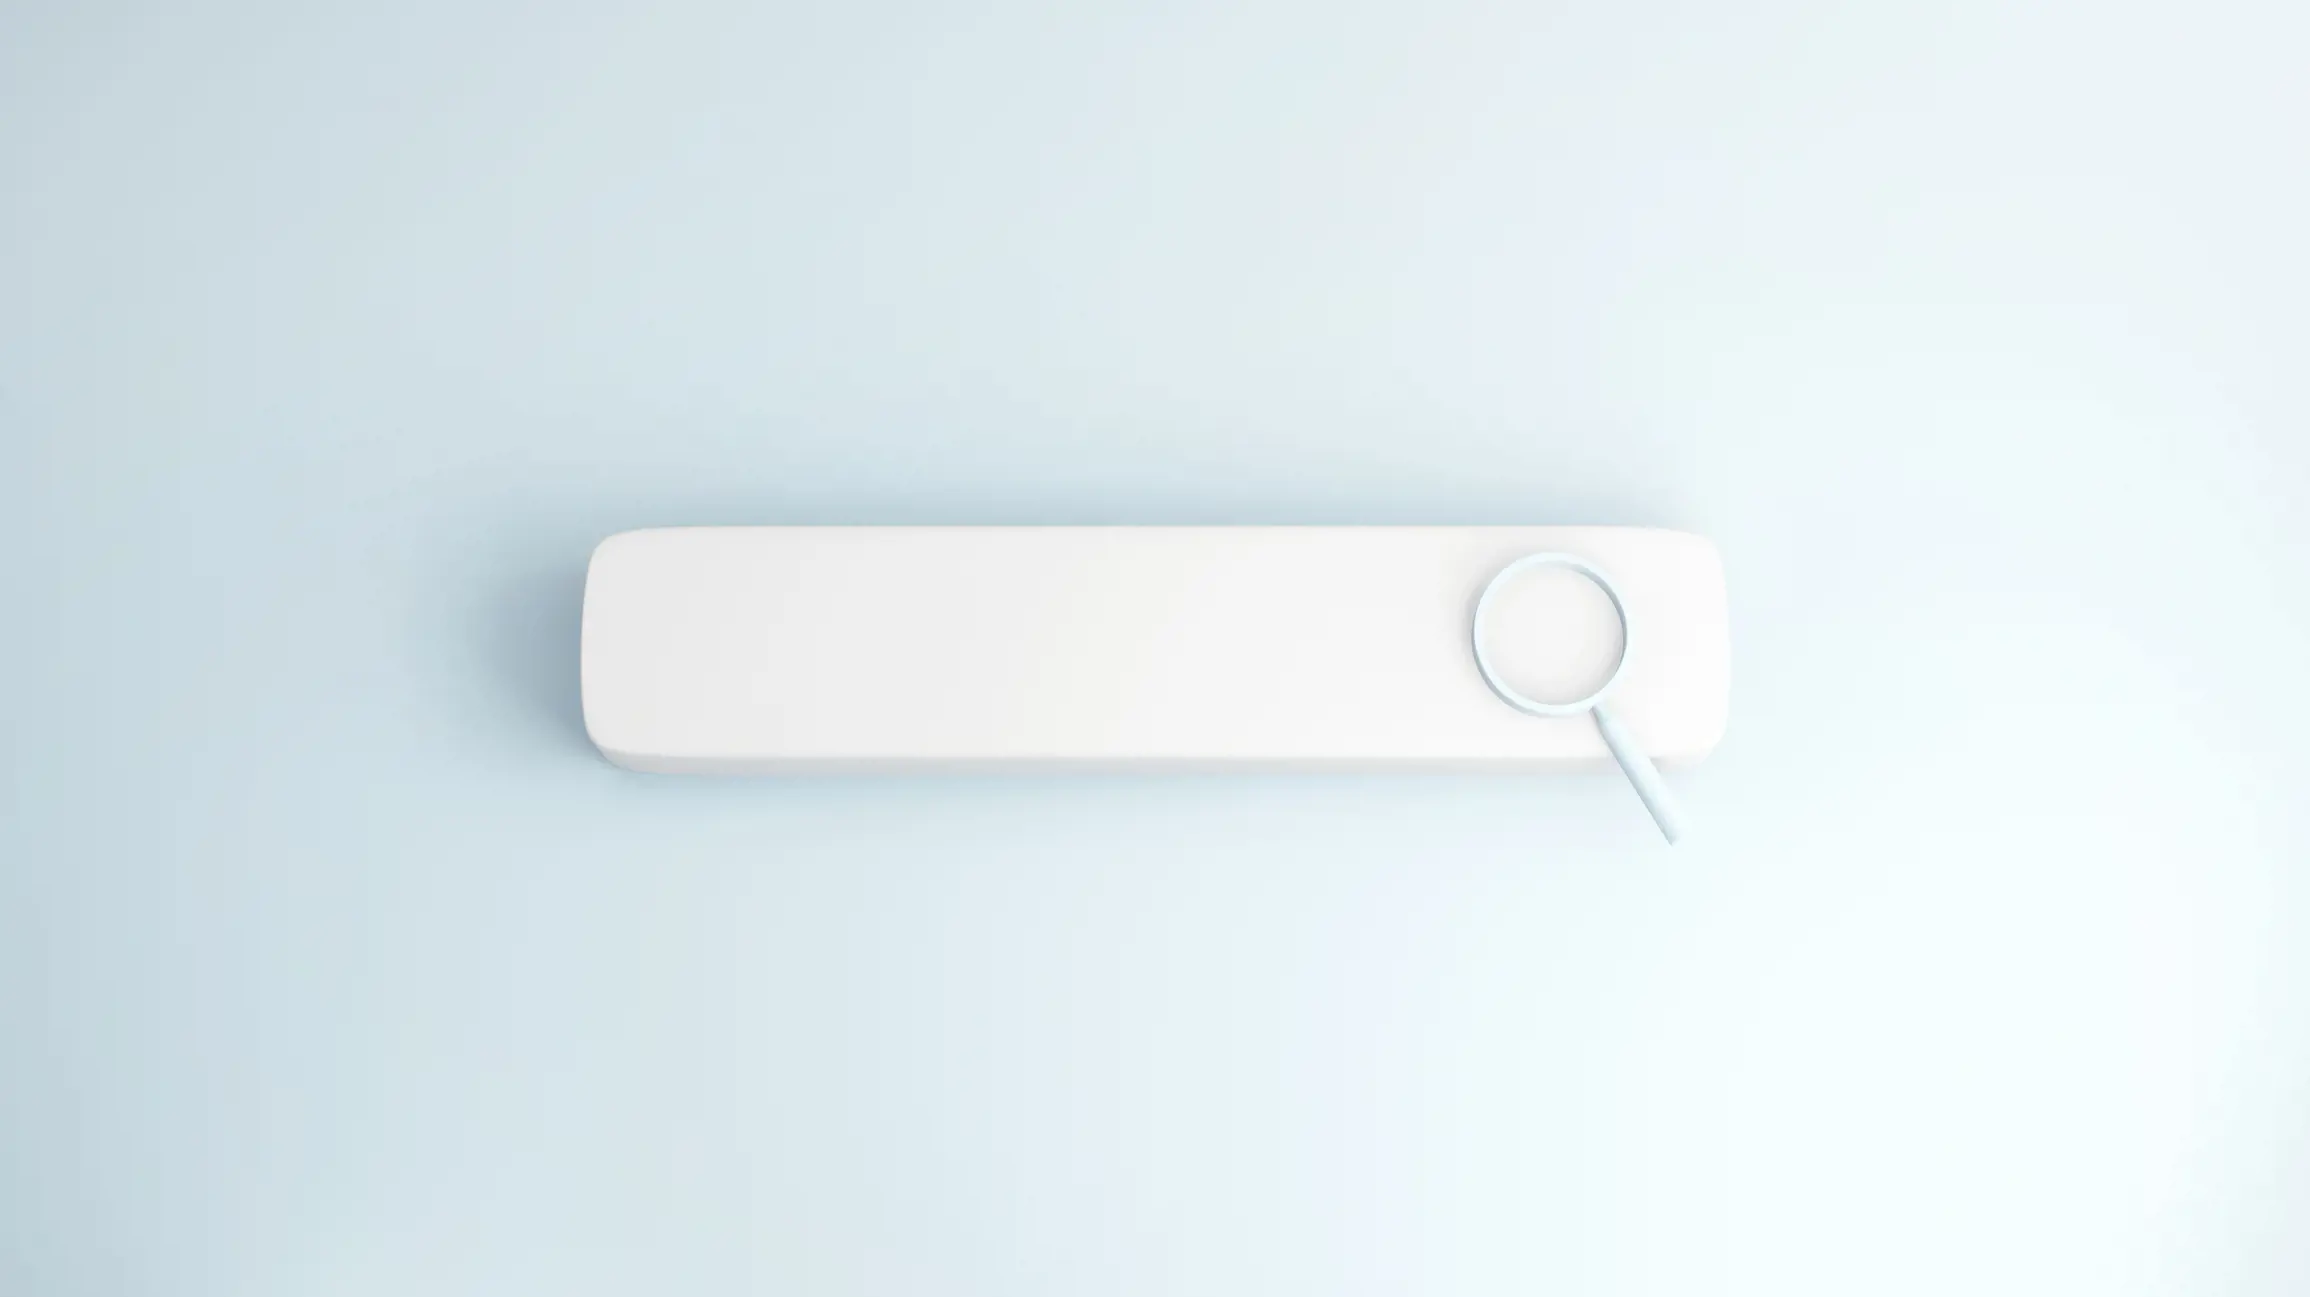 A simple, white search bar with a magnifying glass icon on a light blue background